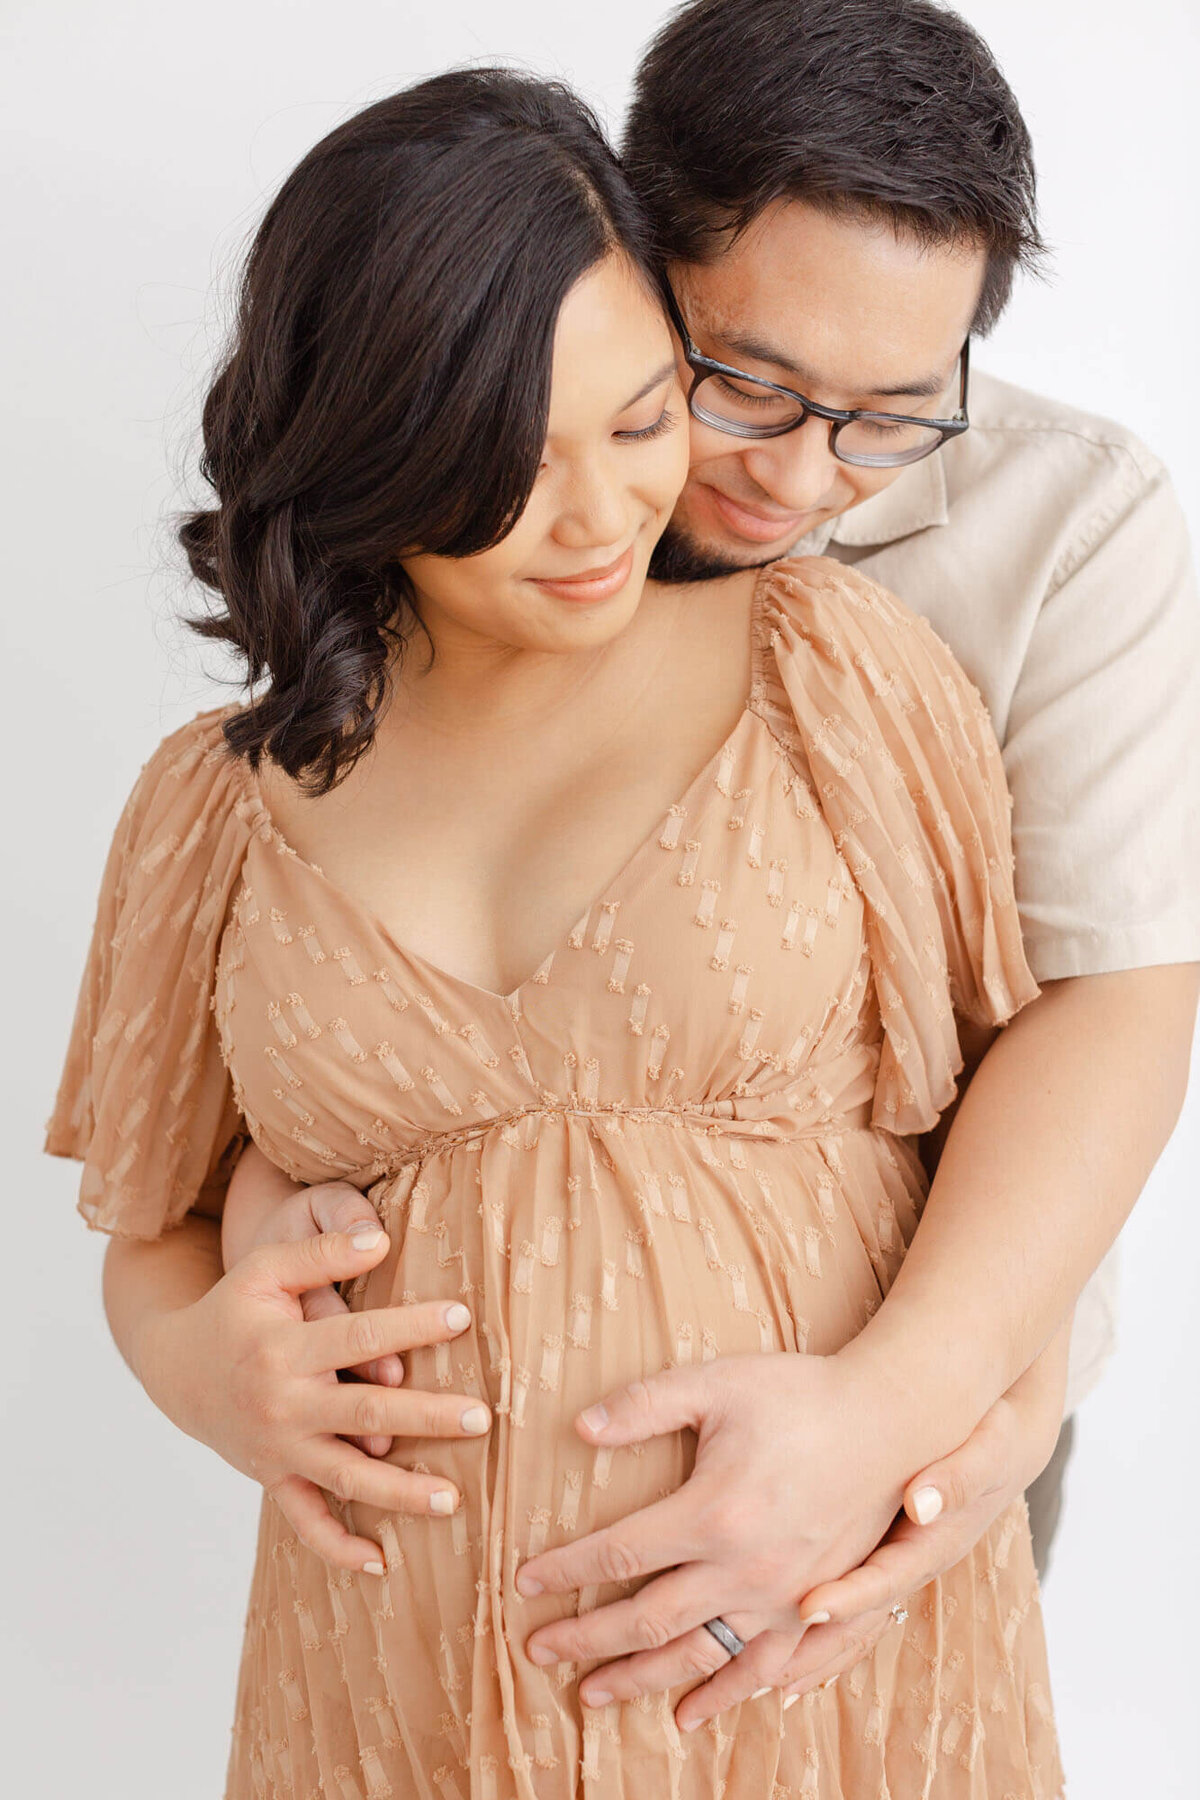 Soon-to-be Dad is standing behind Pregnant woman and wrapping arms around her belly. Their heads are touching at the foreheads and looking down at her belly with their hands on top of each others. They both have soft grins on their faces.